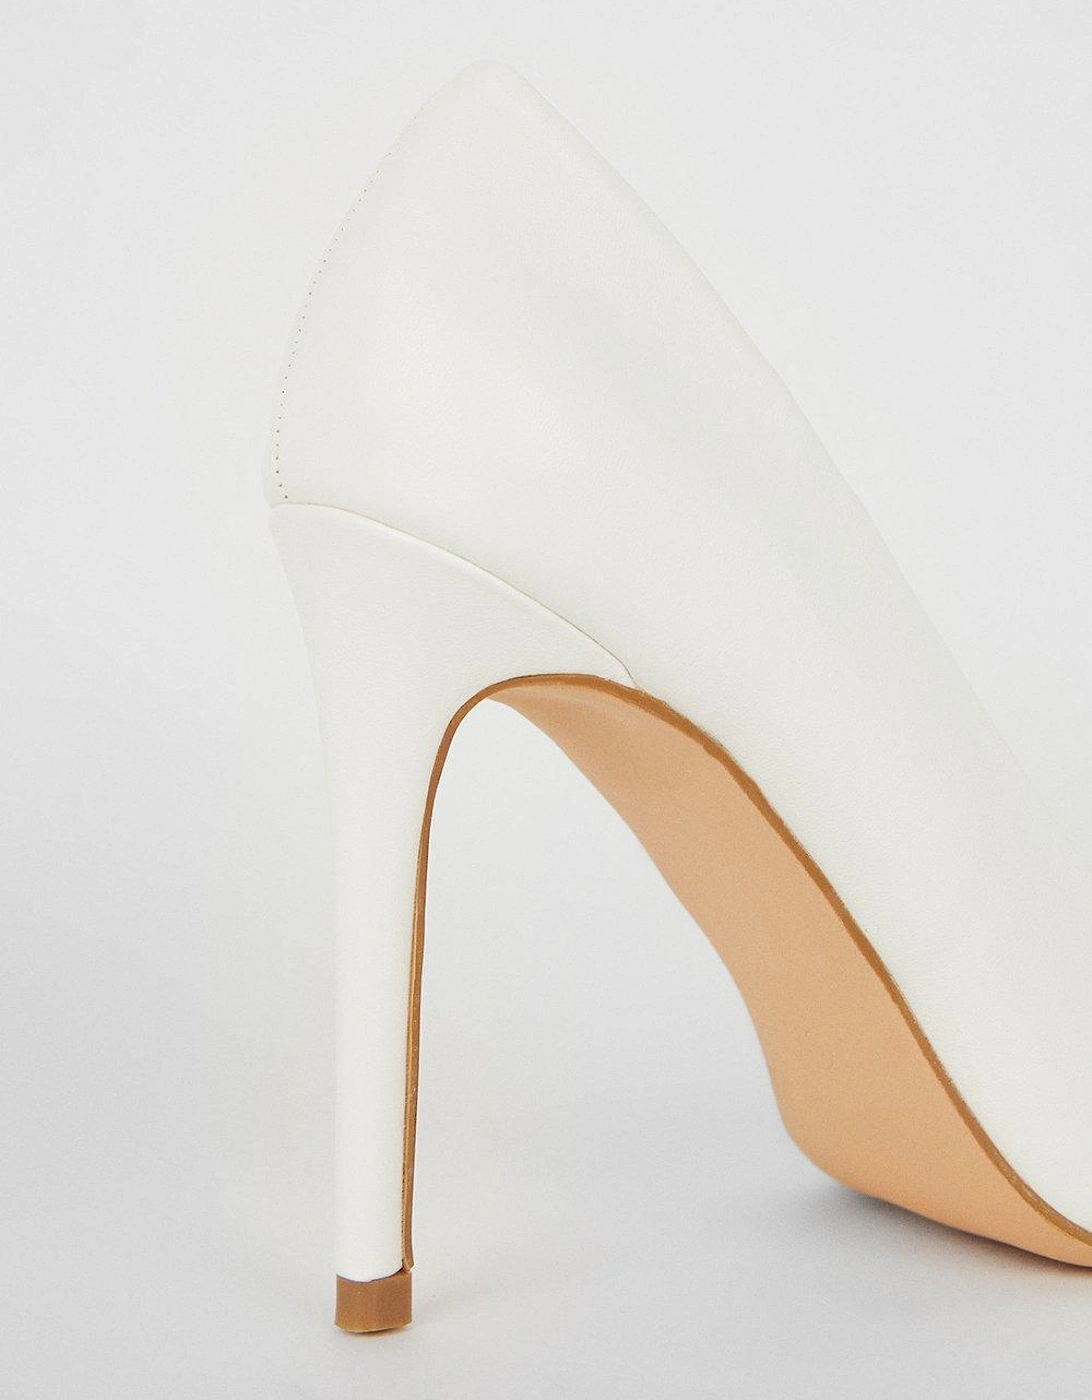 Tate High Heel Stiletto Pointed Court Shoes